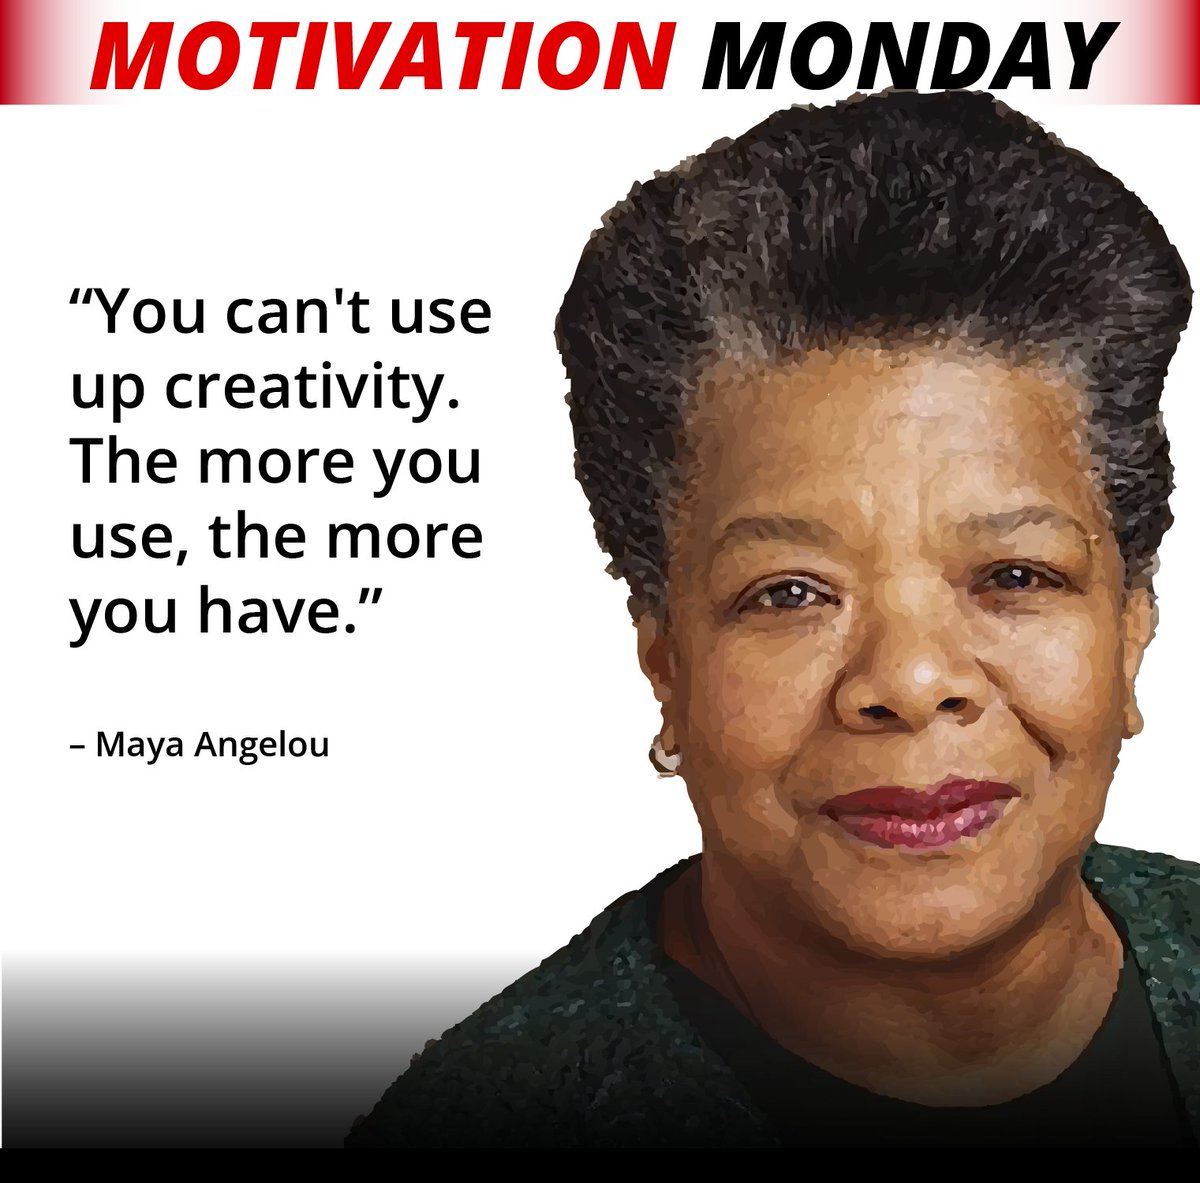 Being creative is what gets you where you need to be. Lose your creativity, and you will lose your will to better yourself. 

#masterdrive #mindsetmonday #roadsafety #motivation #ArriveAlive